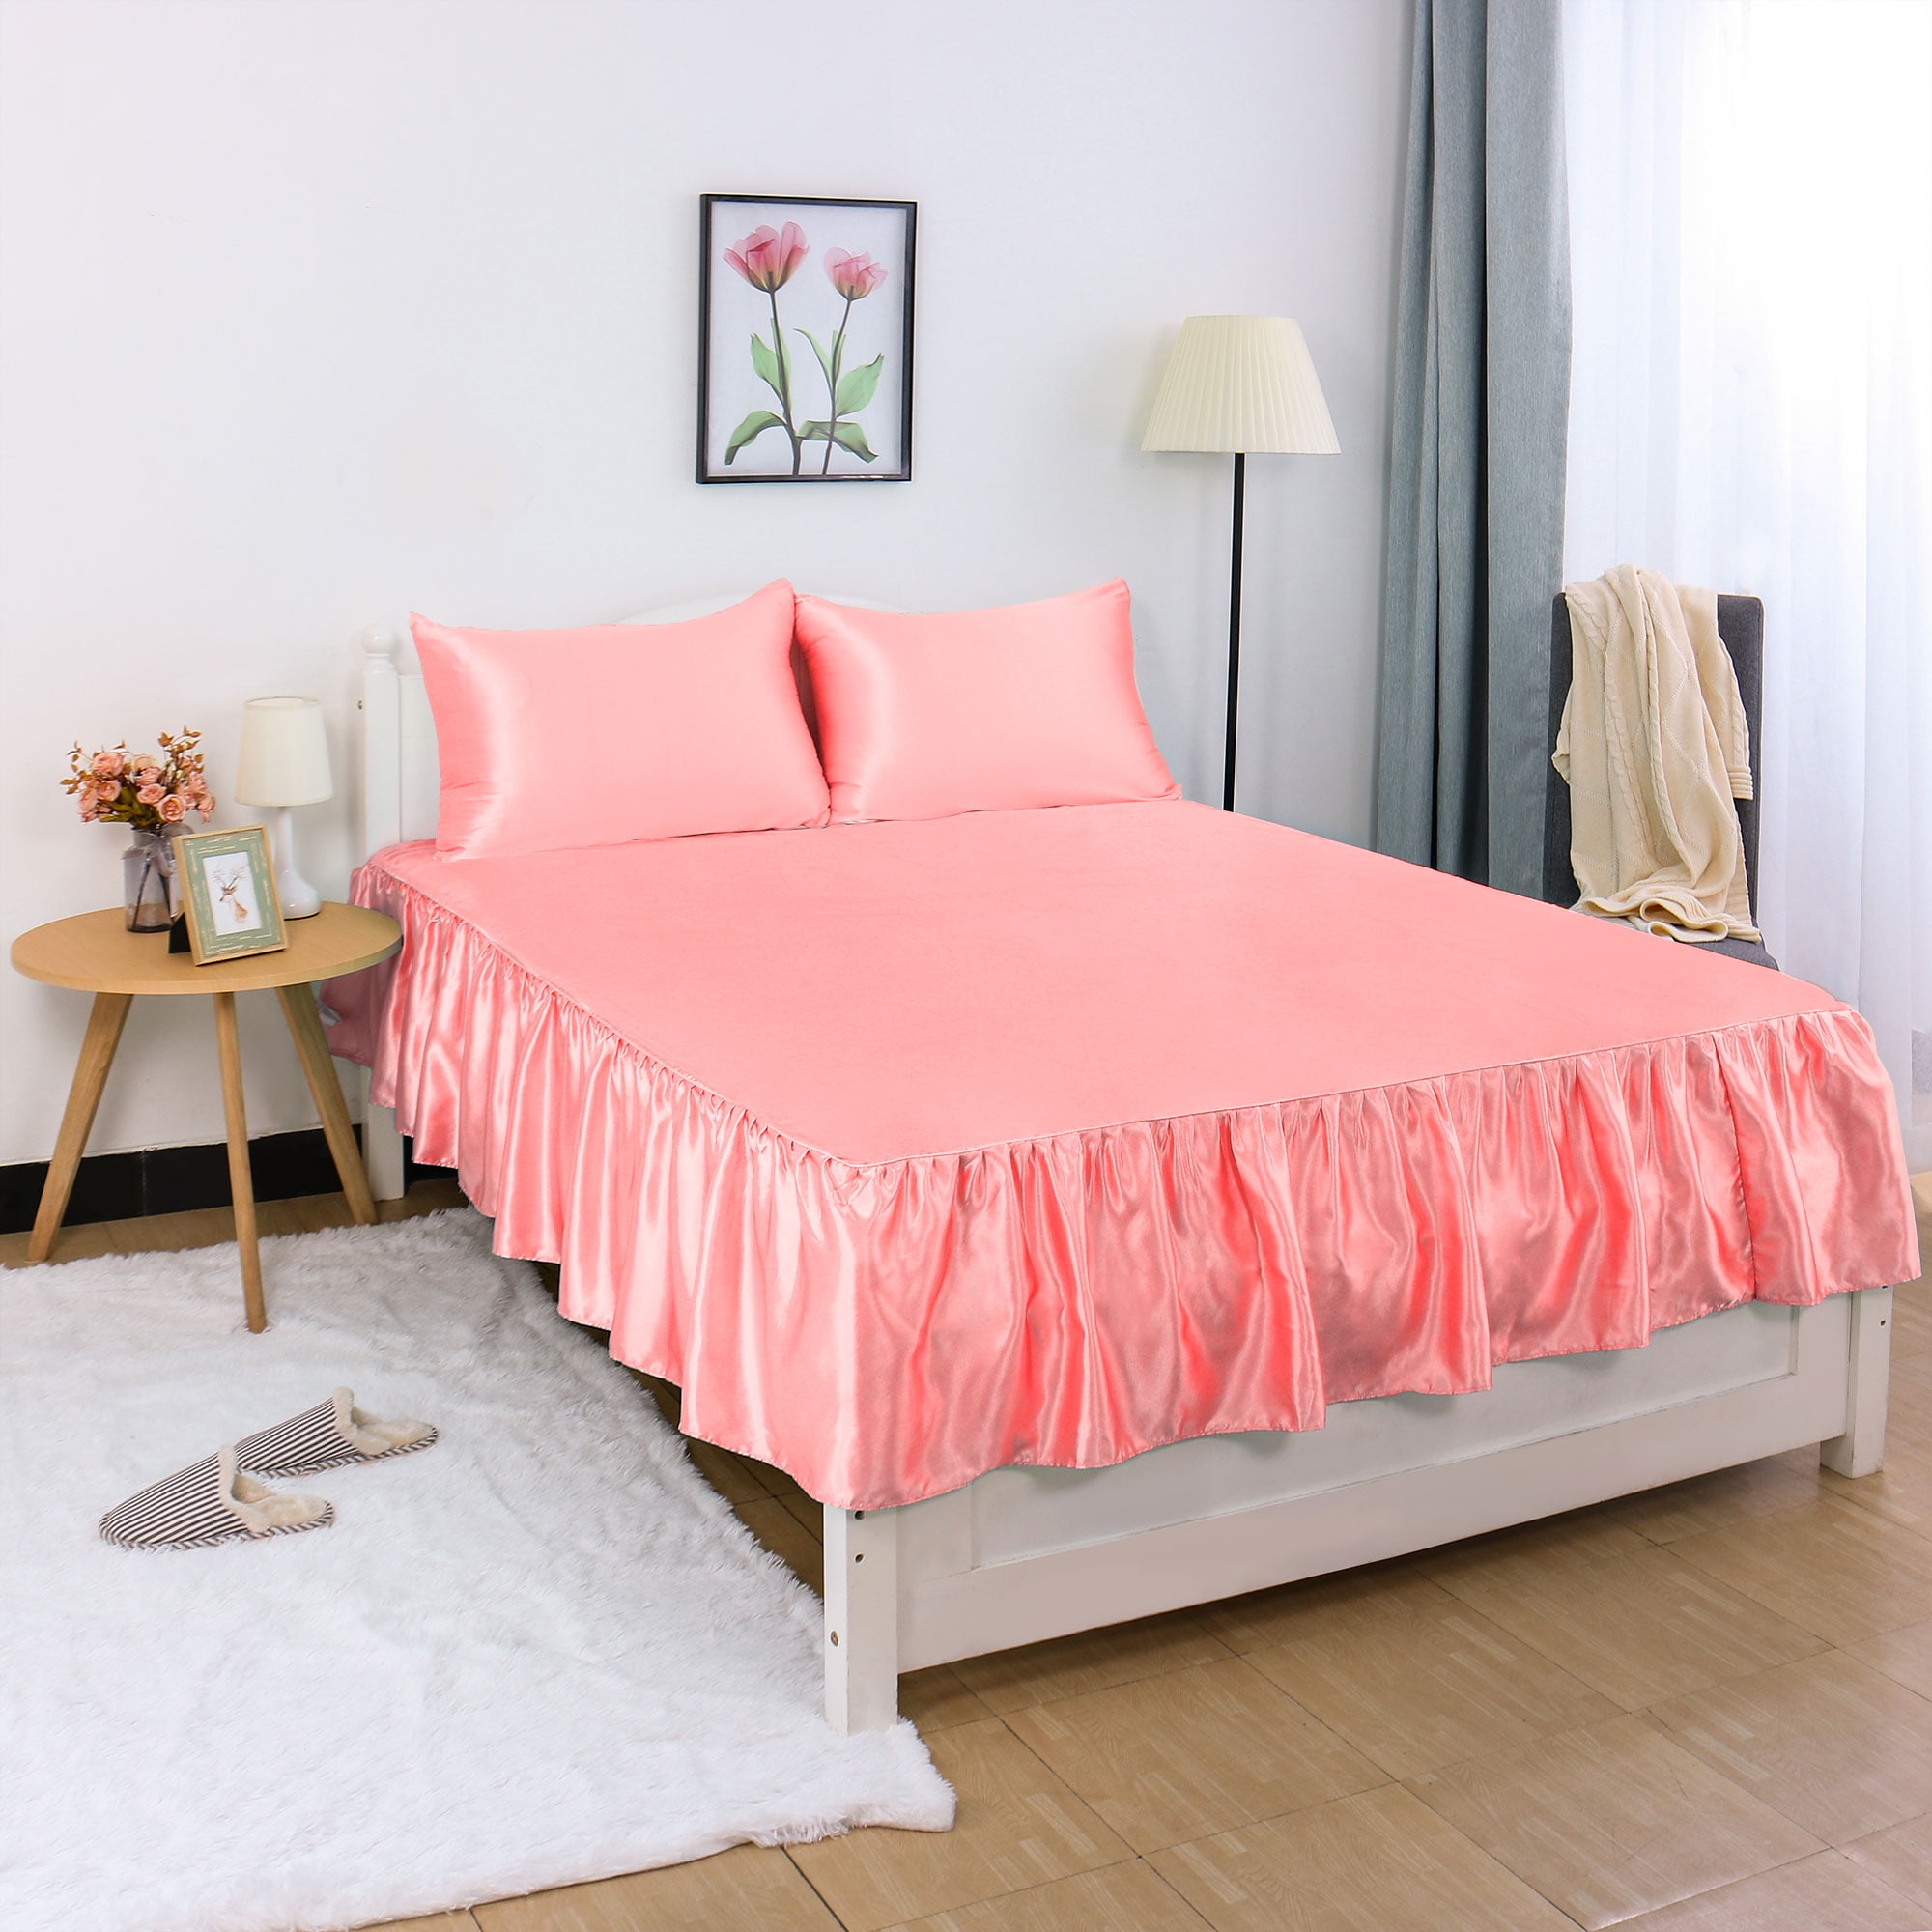 14 Drop sourcing map Satin Silk Bed Skirt 300 Thread-Count Dust Ruffle Wrinkle Free Bedskirt Dust Ruffle Easy to Put on Coral Pink Queen 